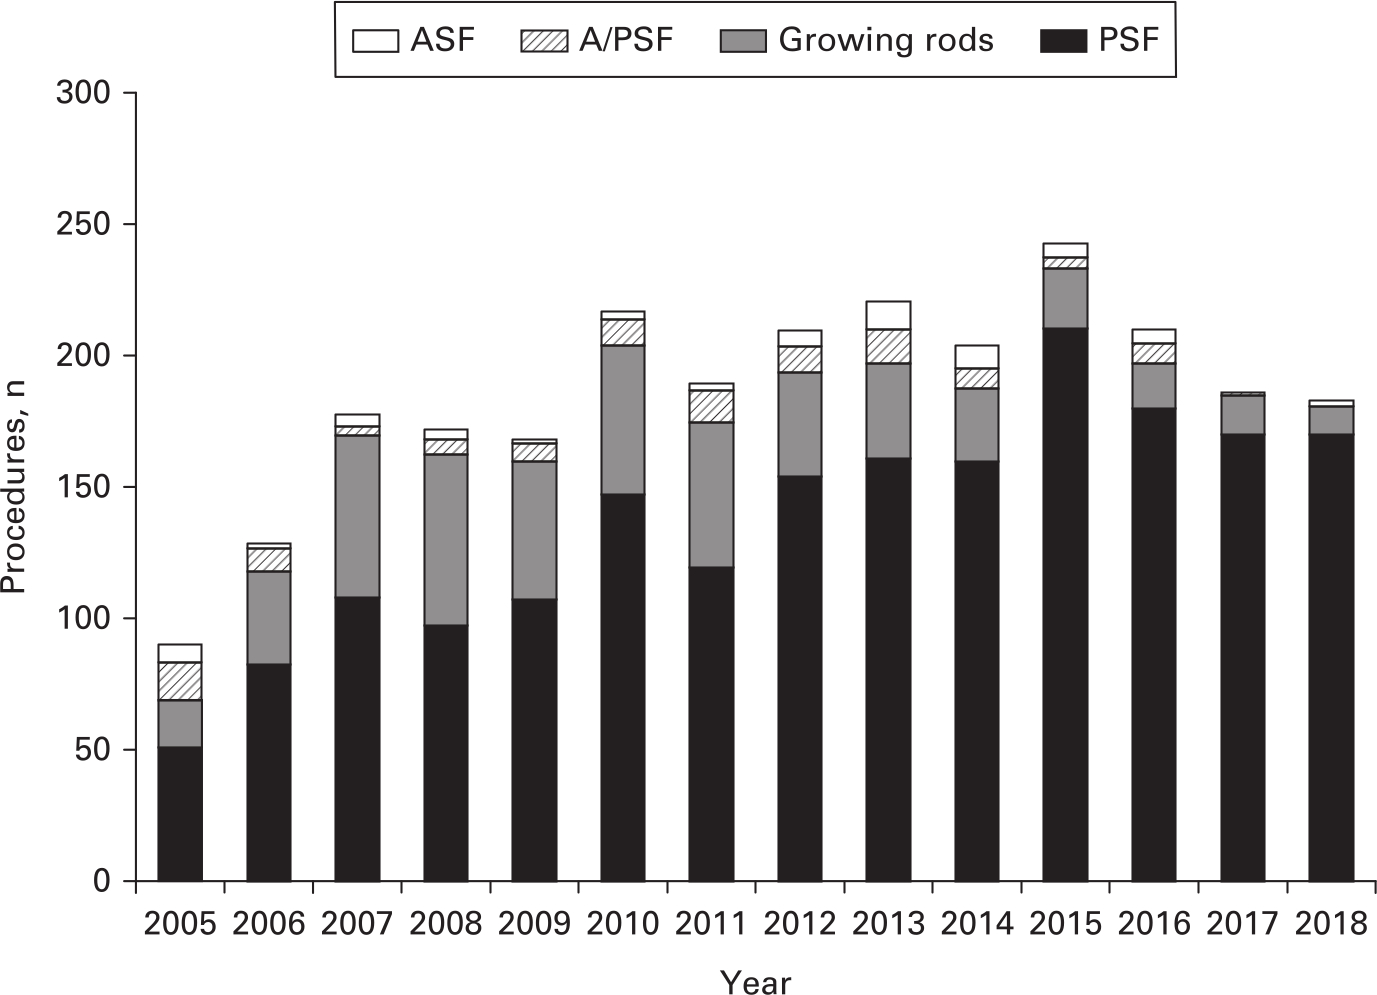 Figure 6 
          Types and number of surgical procedures performed for paediatric spinal deformity between 2005 and 2018. ASF, anterior spinal fusion; A/PSF: combined anteroposterior spinal fusion; PSF, posterior spinal fusion.
        